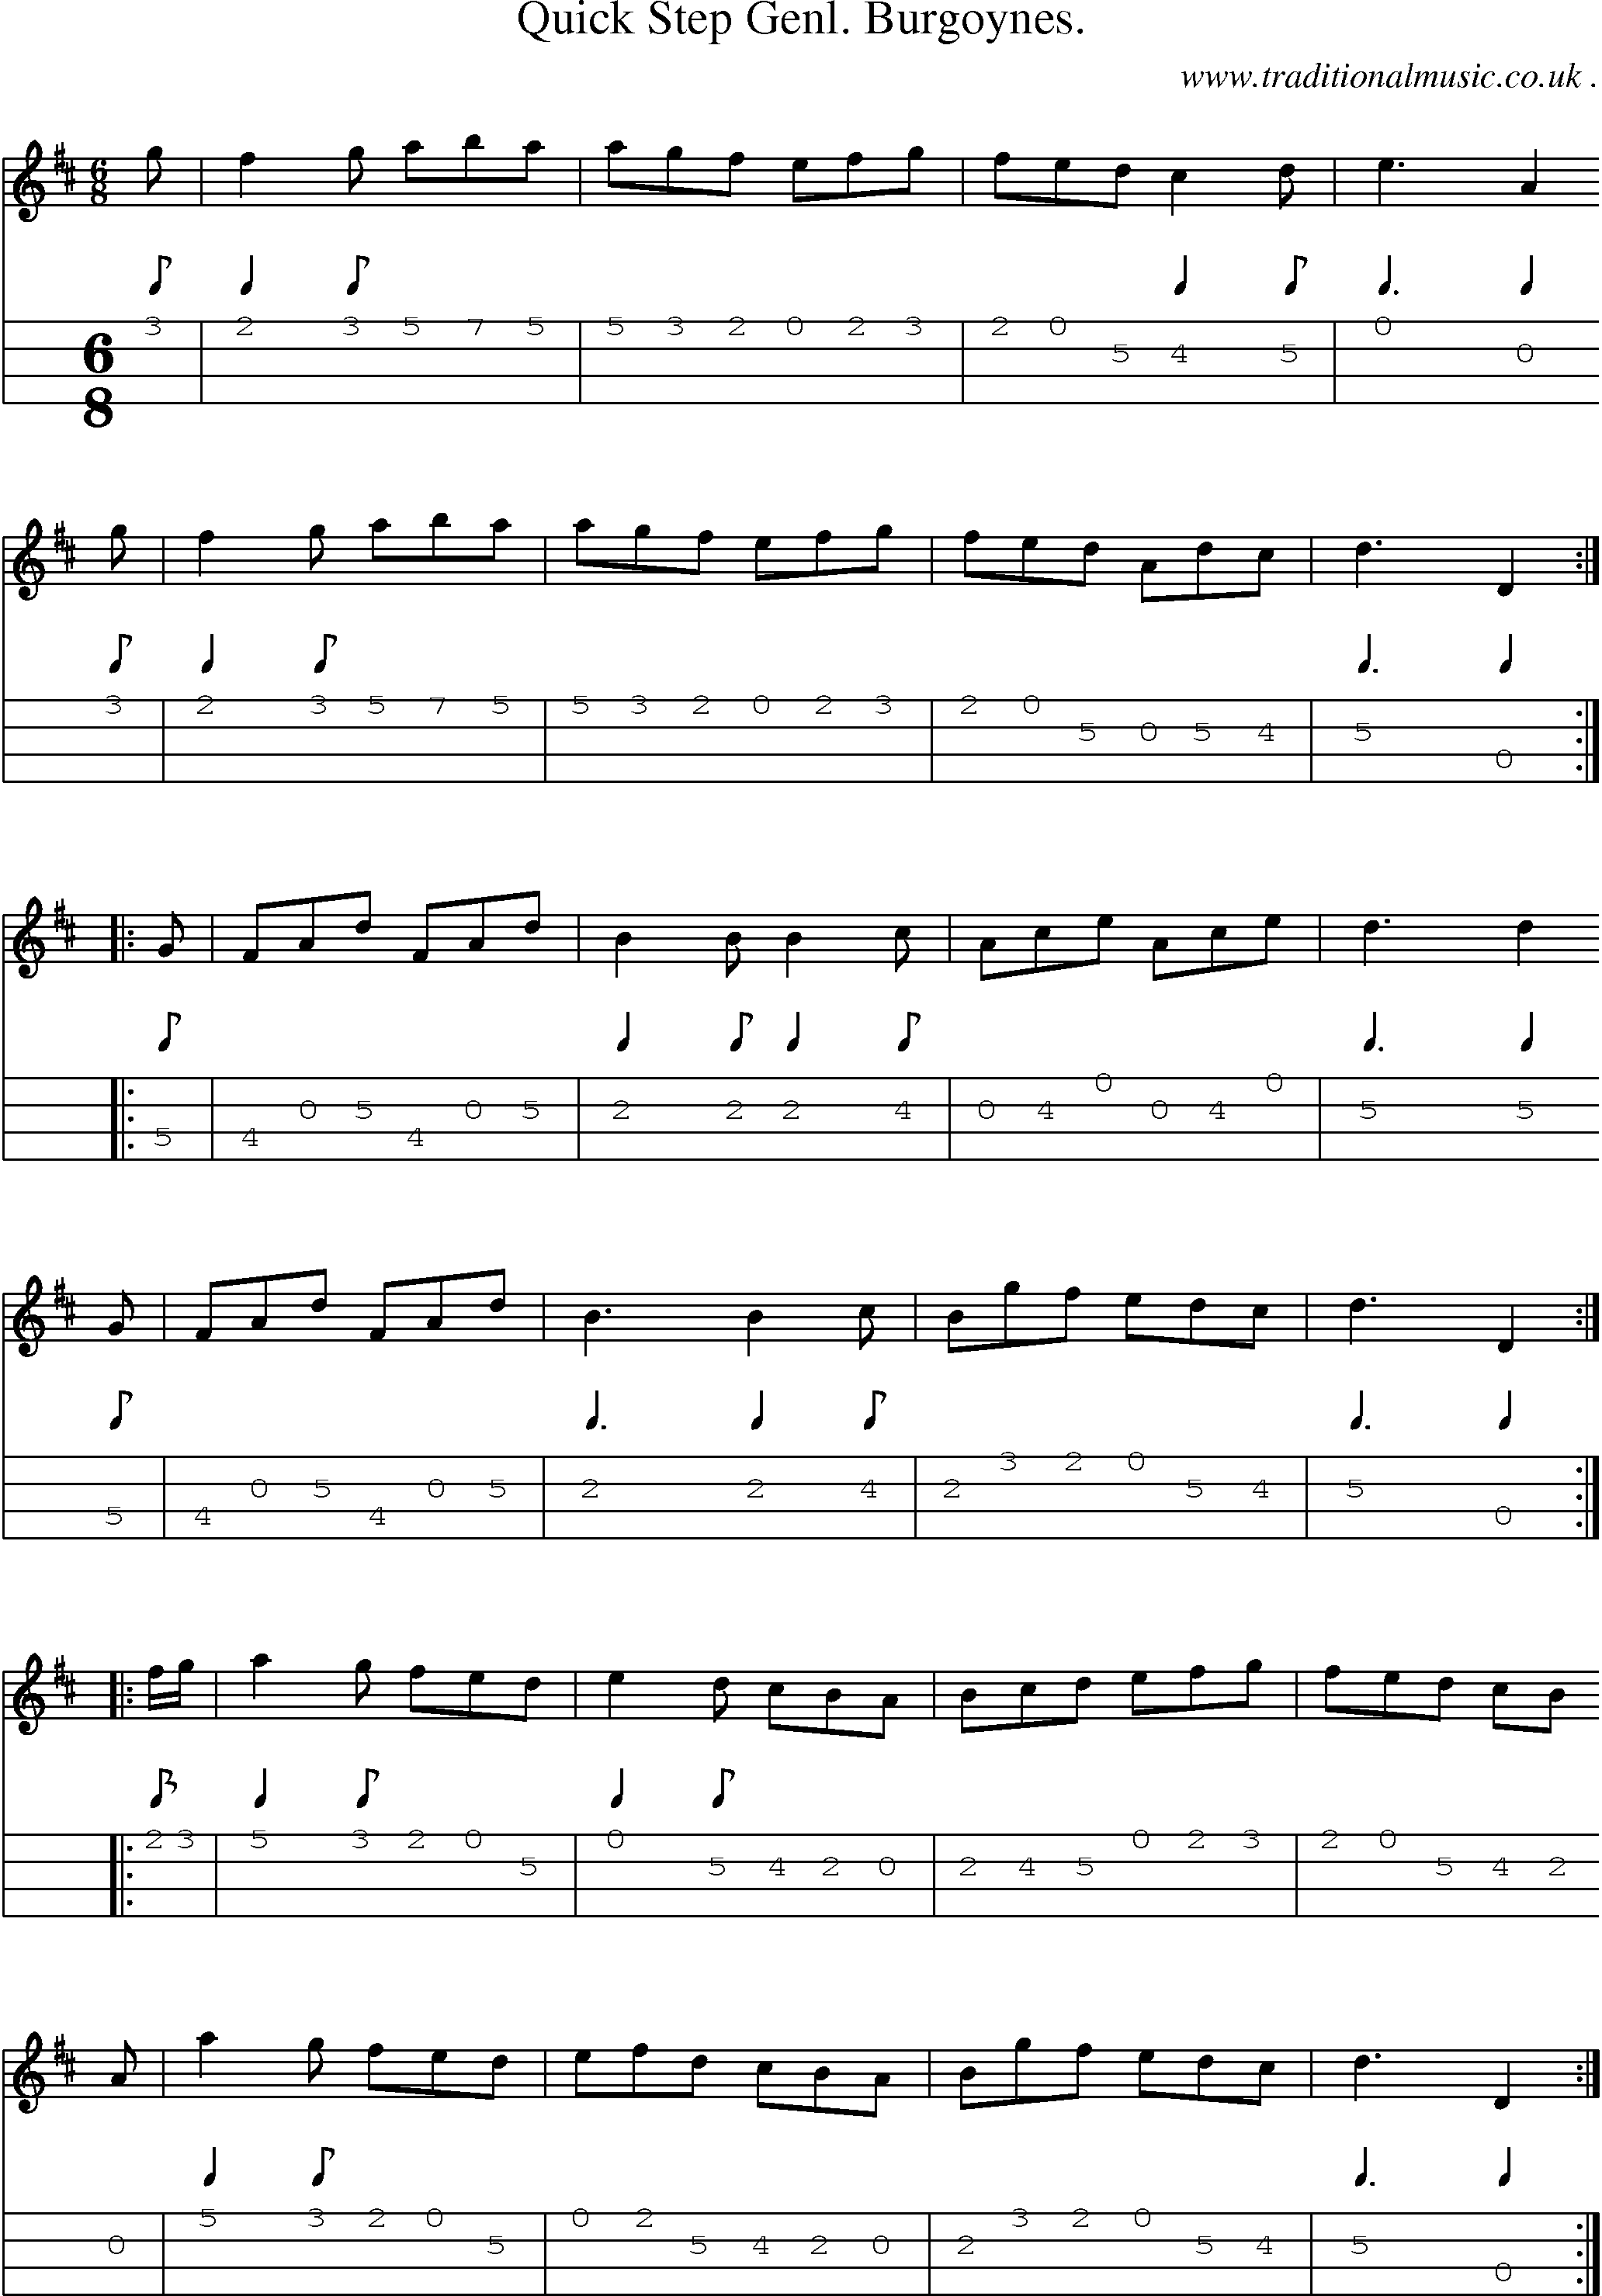 Sheet-music  score, Chords and Mandolin Tabs for Quick Step Genl Burgoynes